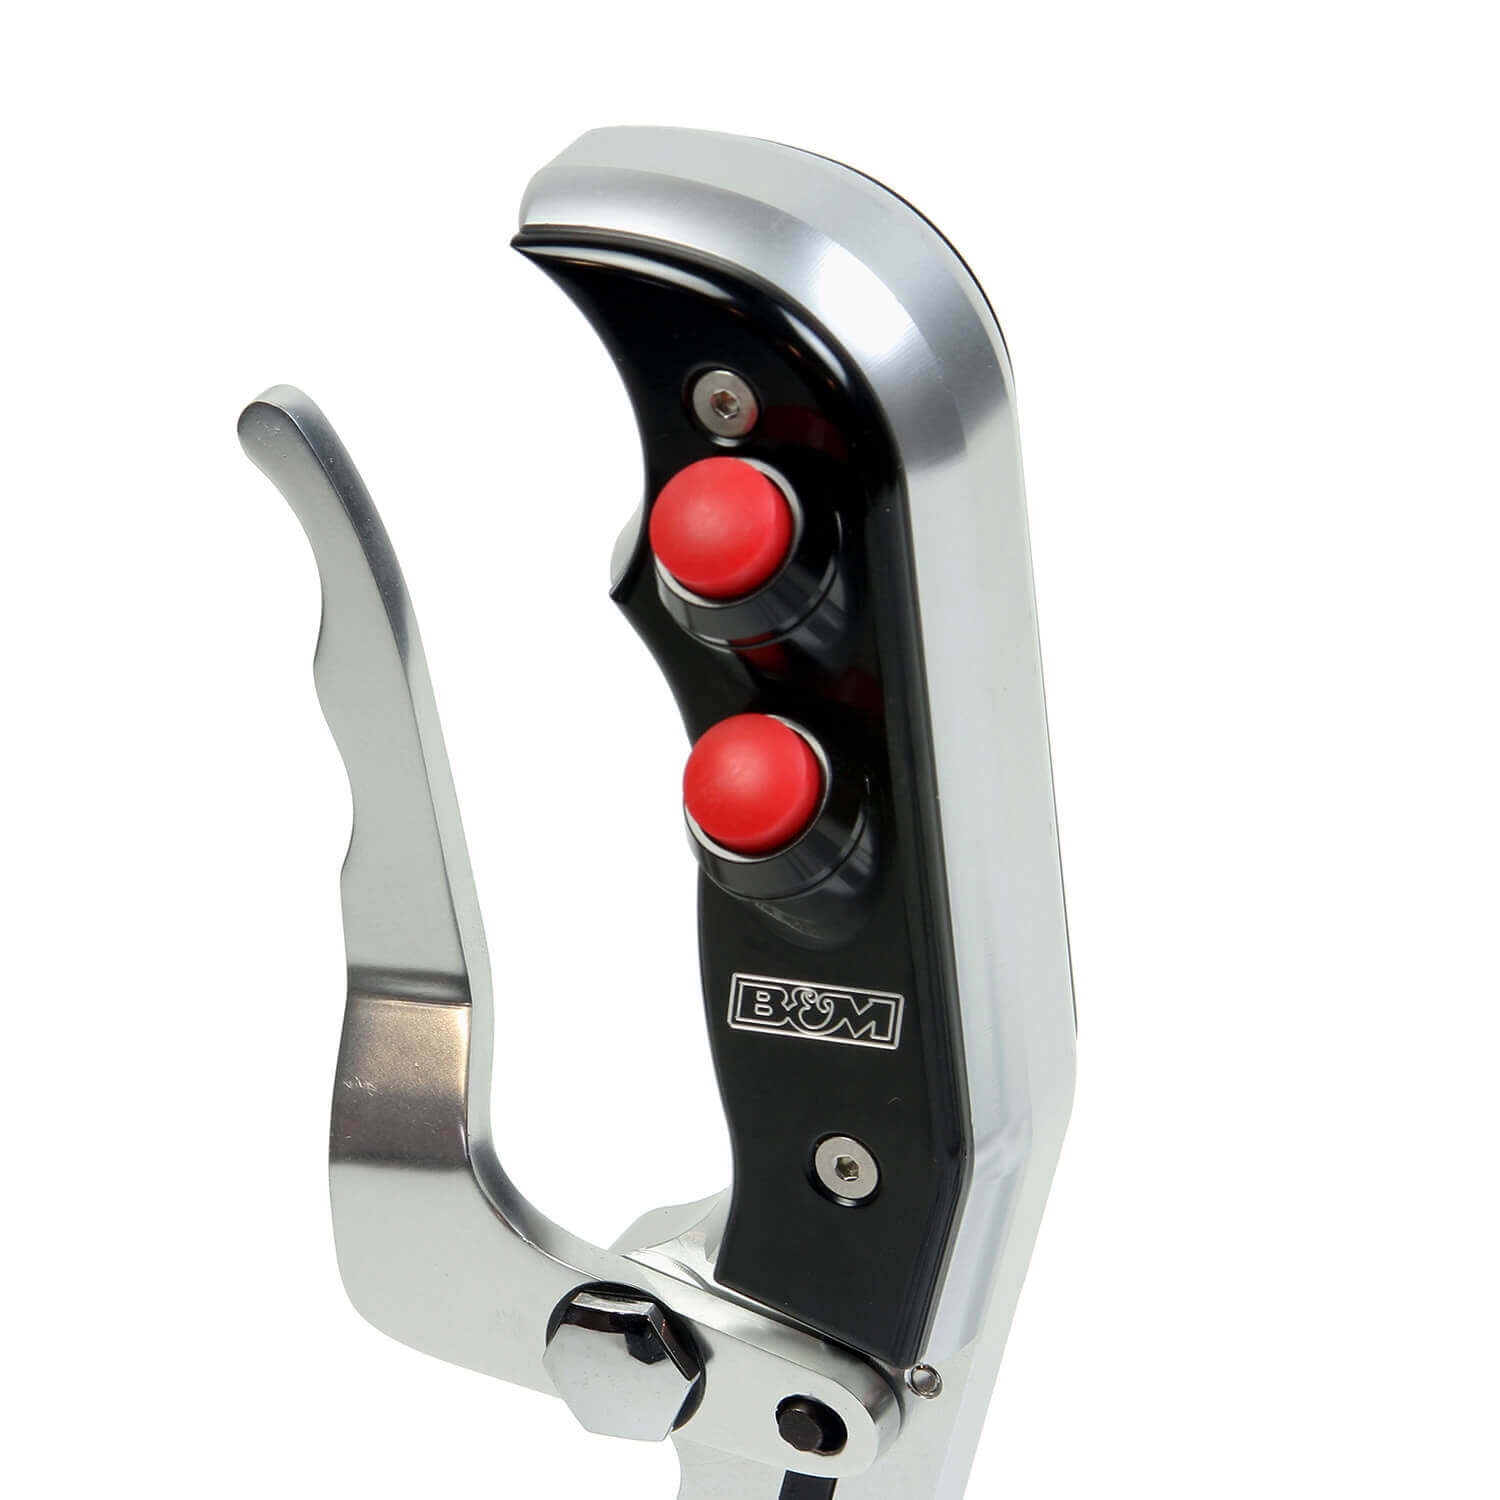 B&M 81104 Automatic Gated Shifter - Dual Button Magnum Grip 